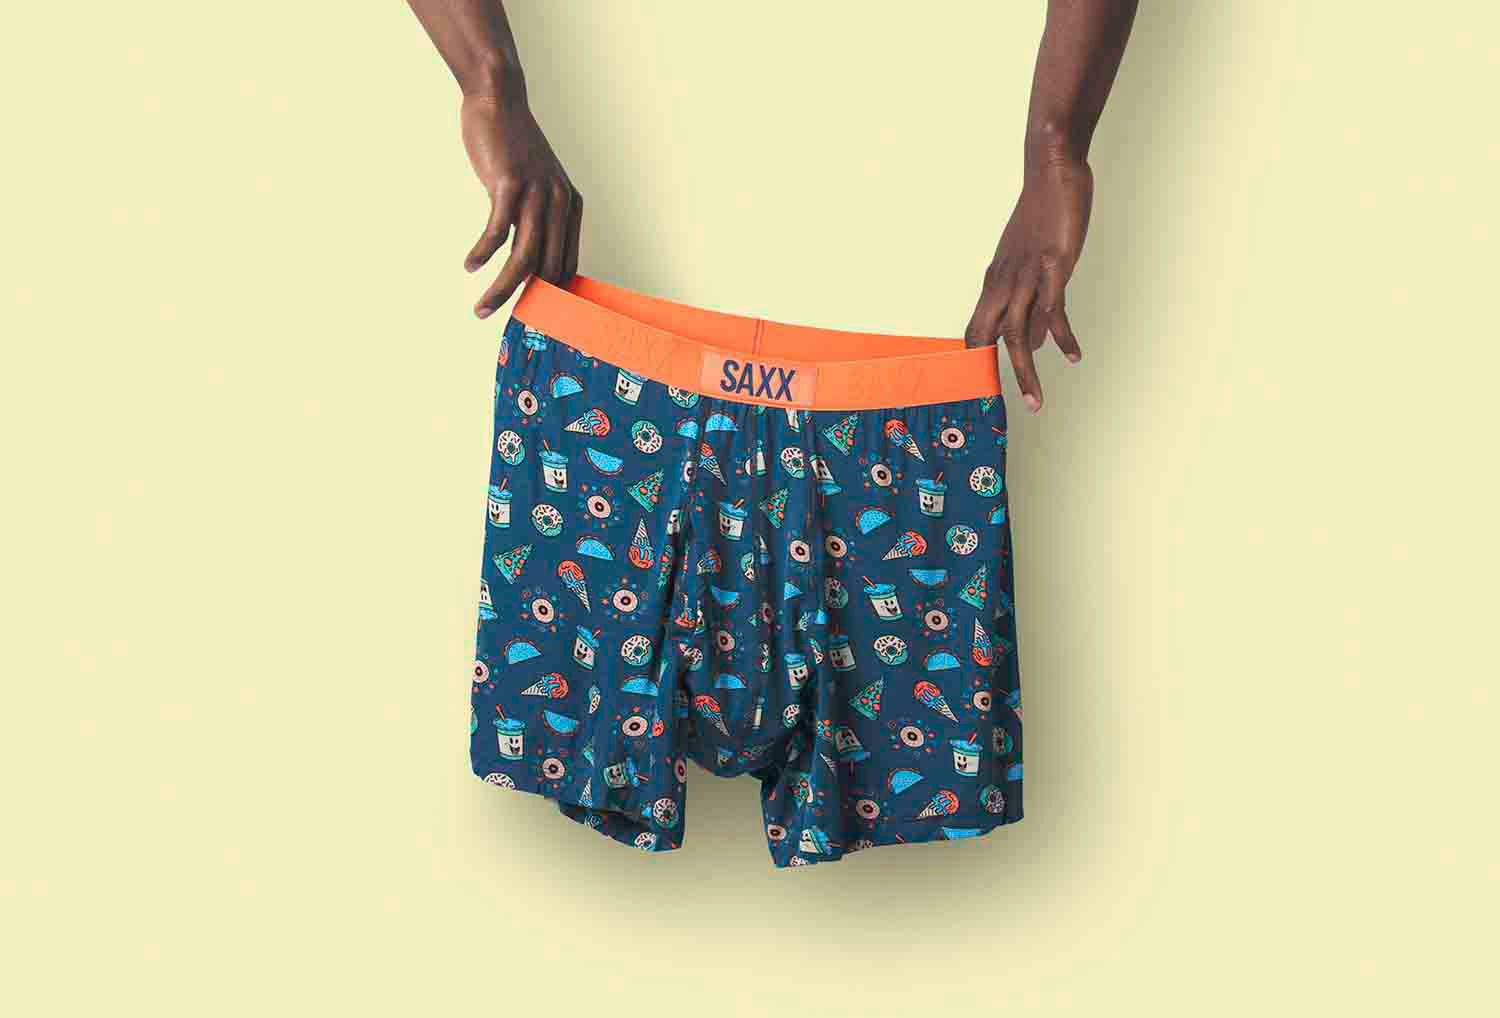 Stance Mens Staple Underwear : : Clothing, Shoes & Accessories